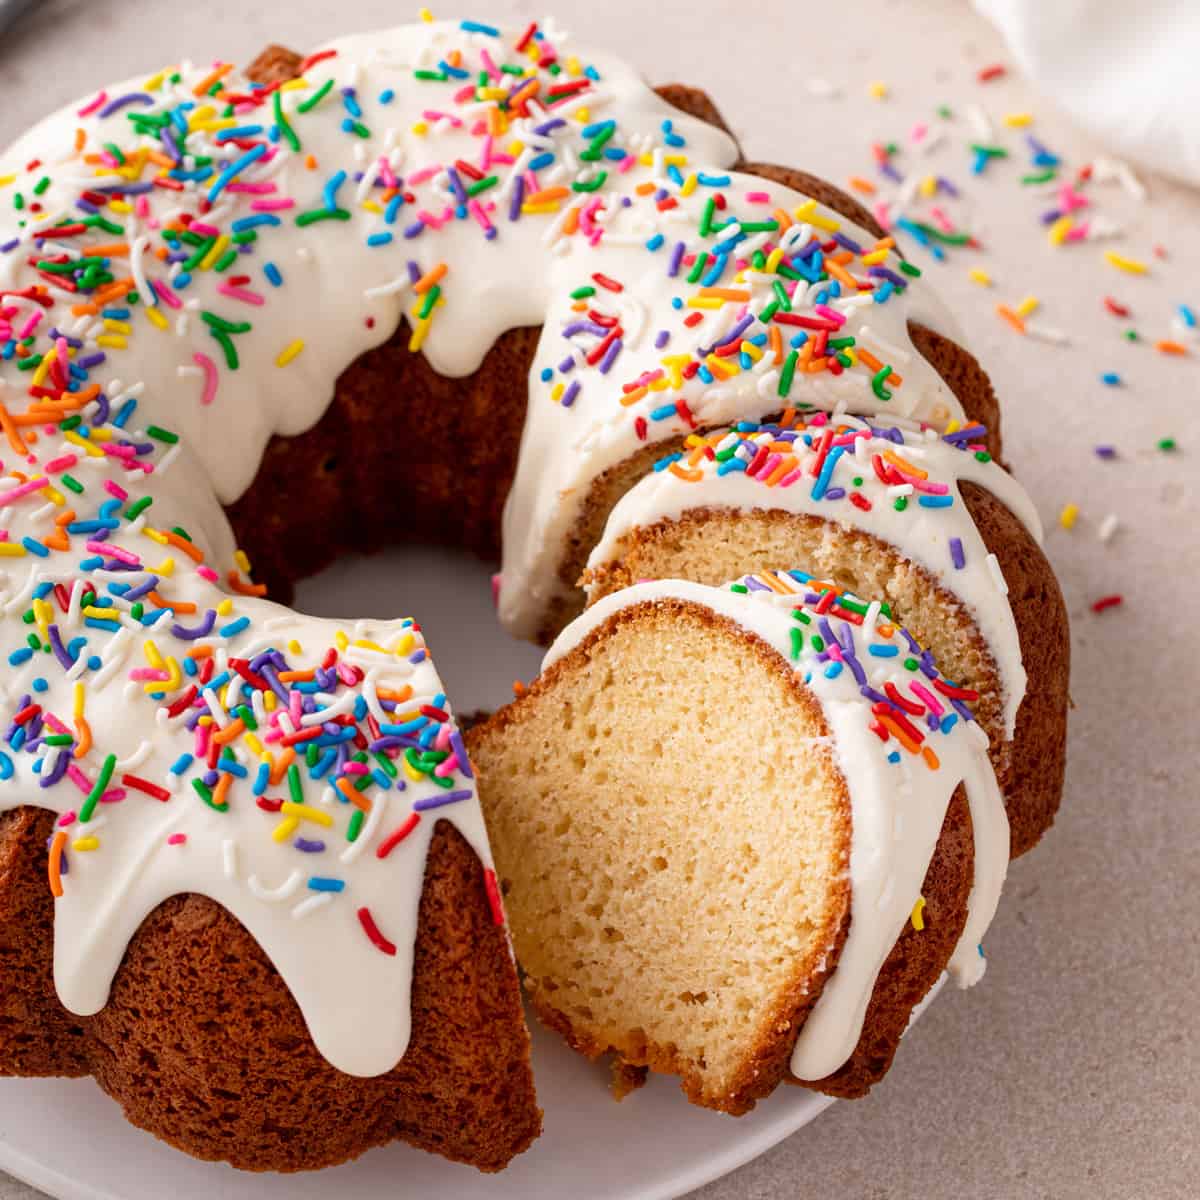 How to Keep a Bundt Cake From Sticking to the Pan